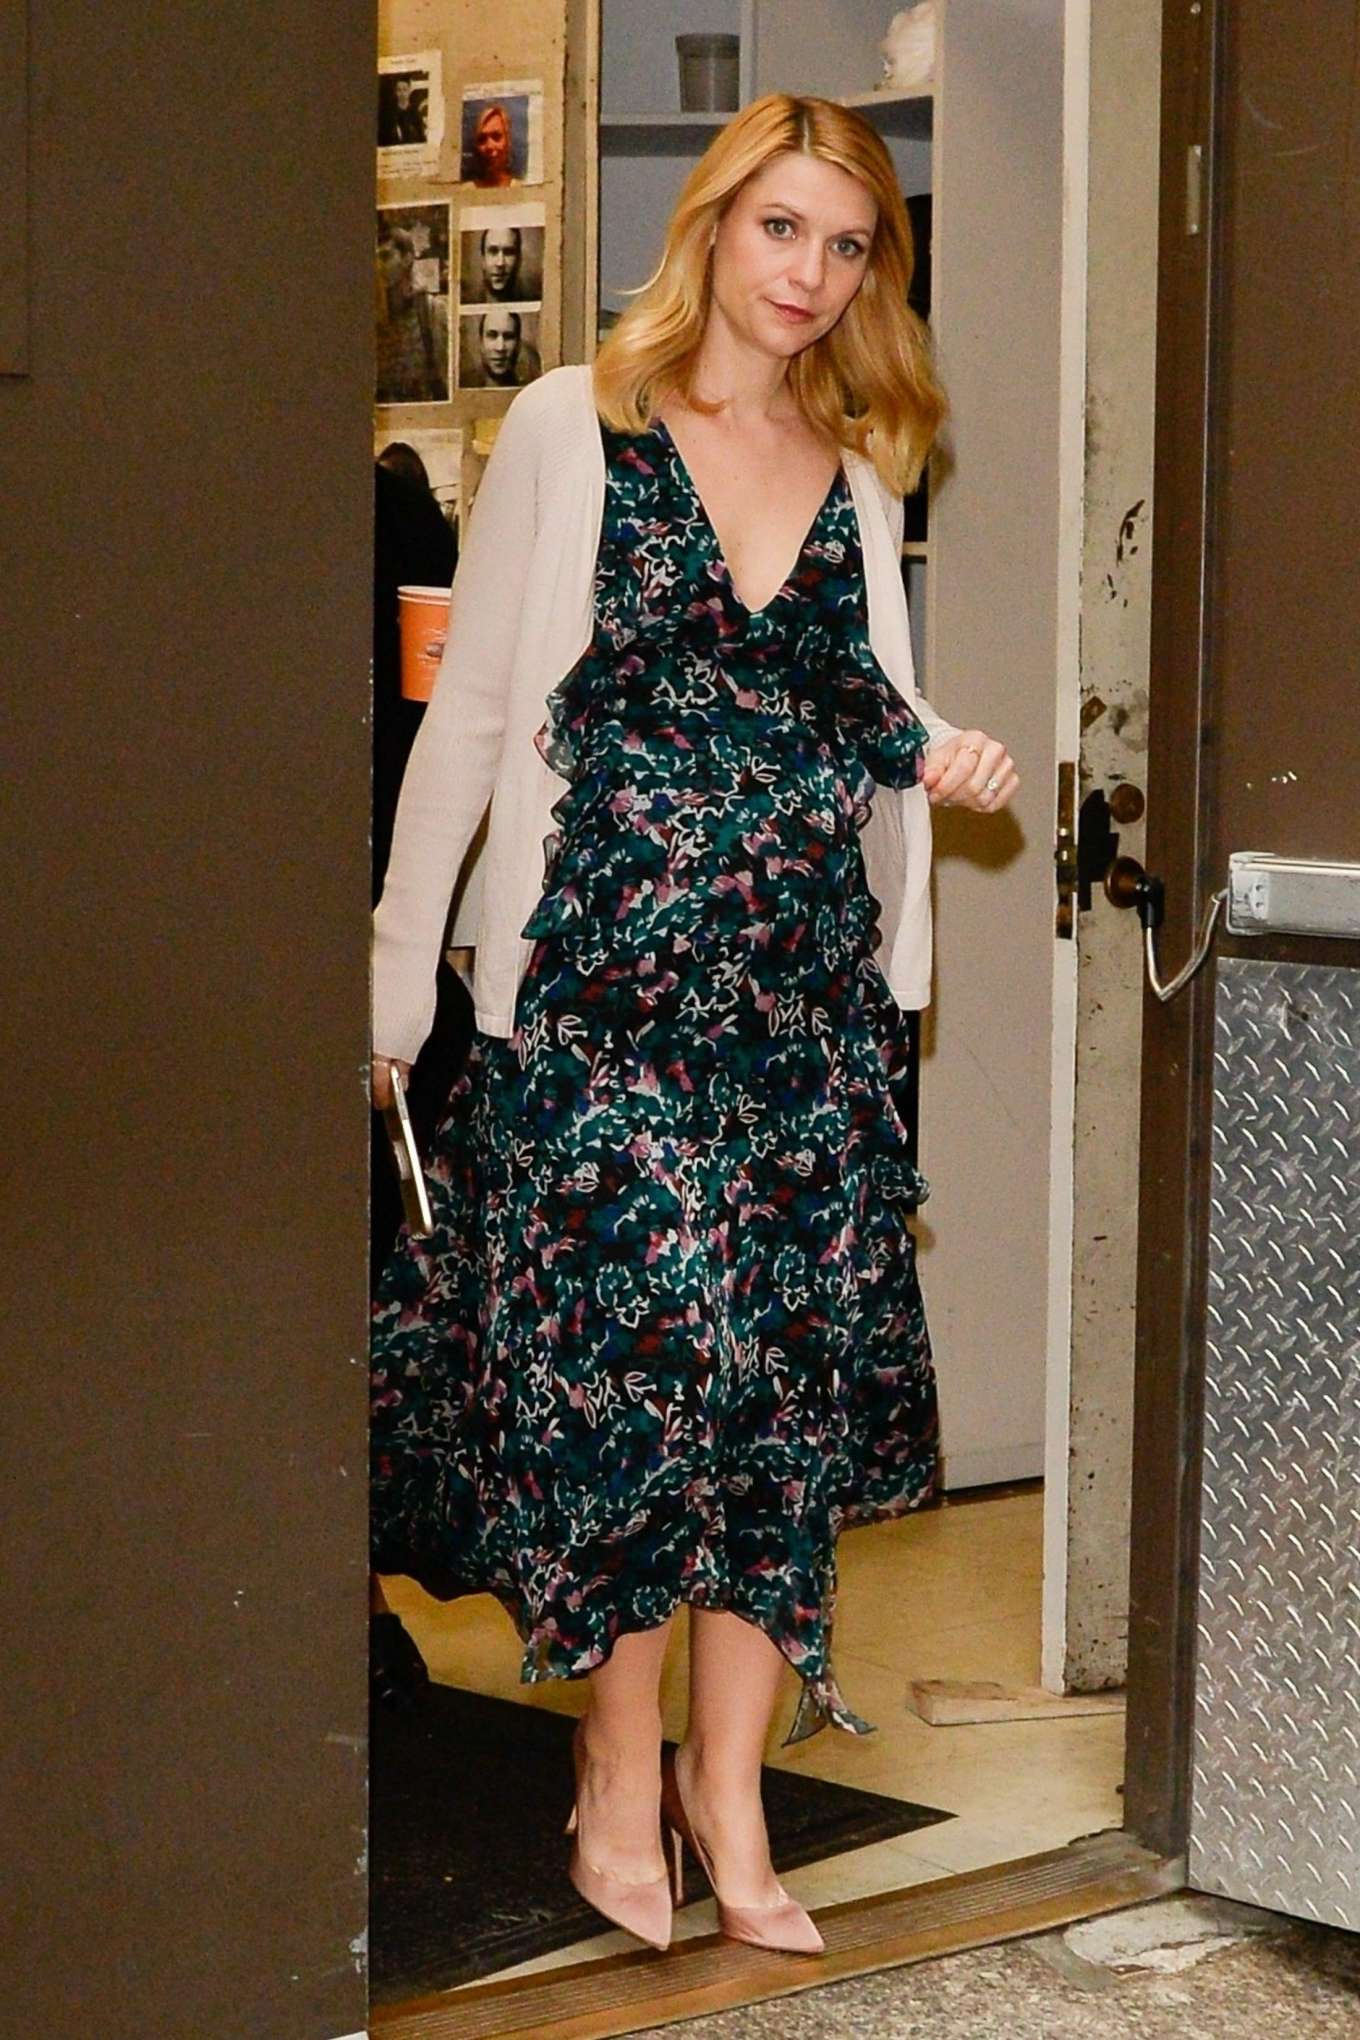 Claire Danes â€“ Today show in New York City